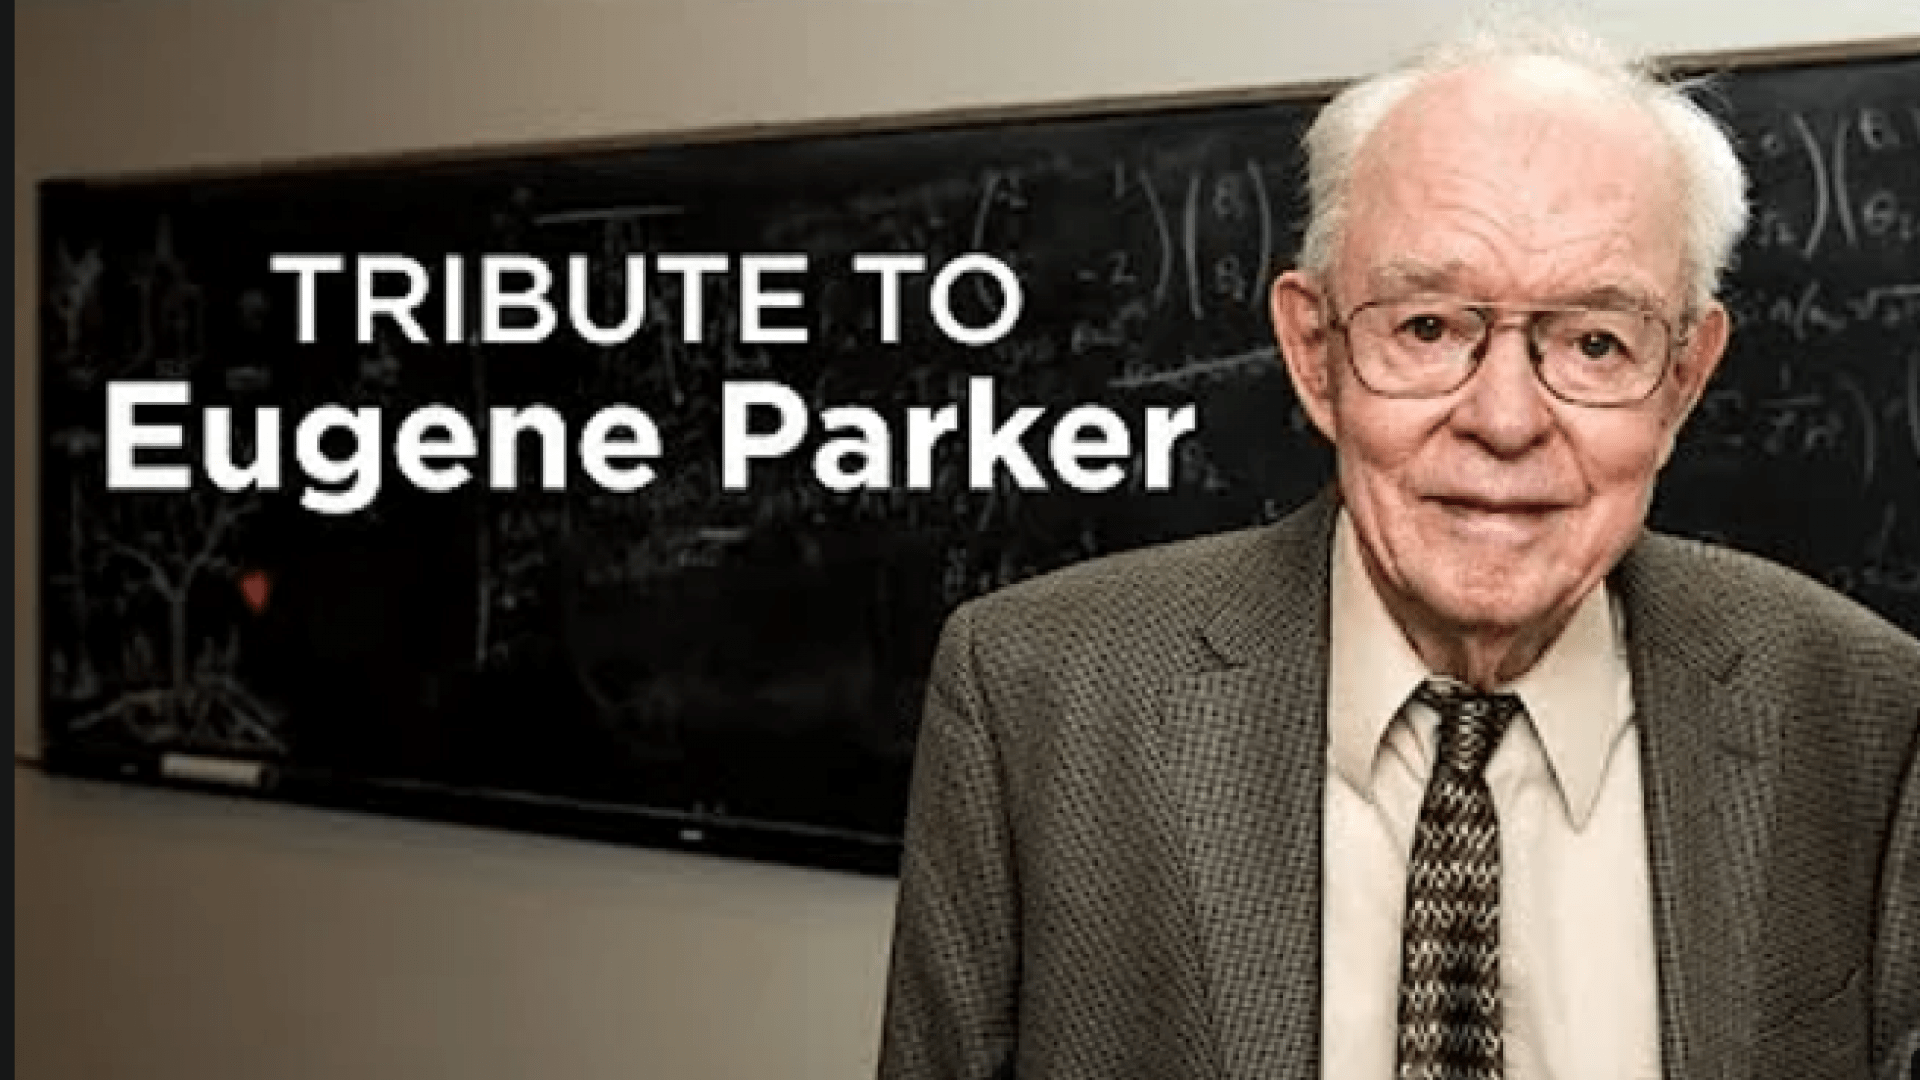 Eugene Parker stands to right with the words "Tribute to Eugene Parker" over his right shoulder. He's standing in front of a chalkboard with math equations written on it.